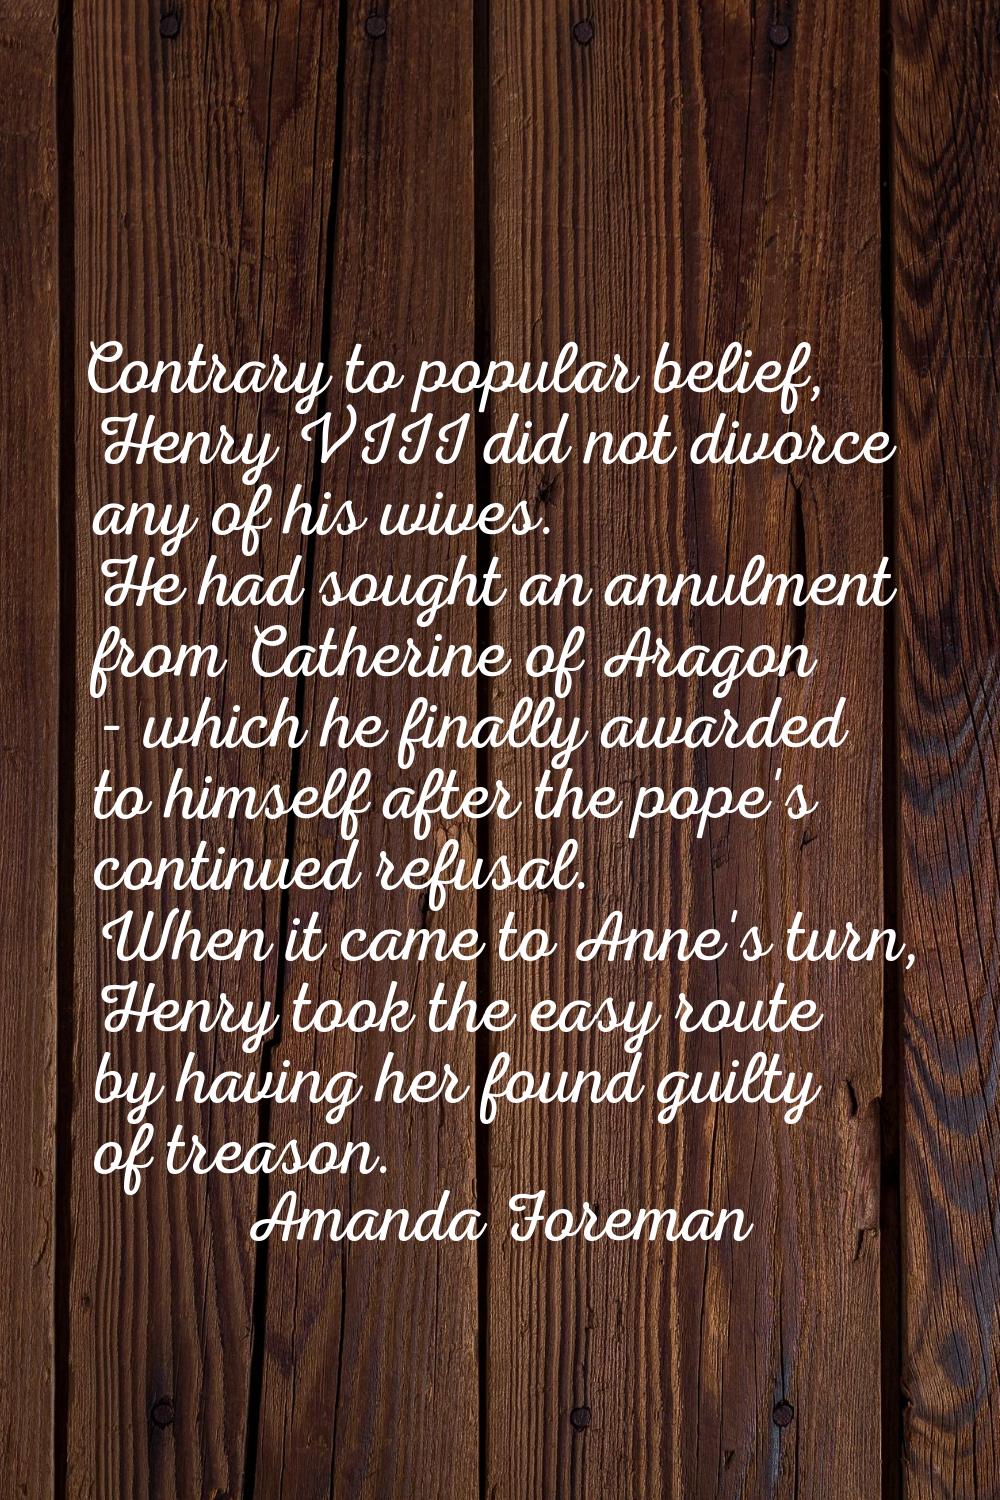 Contrary to popular belief, Henry VIII did not divorce any of his wives. He had sought an annulment